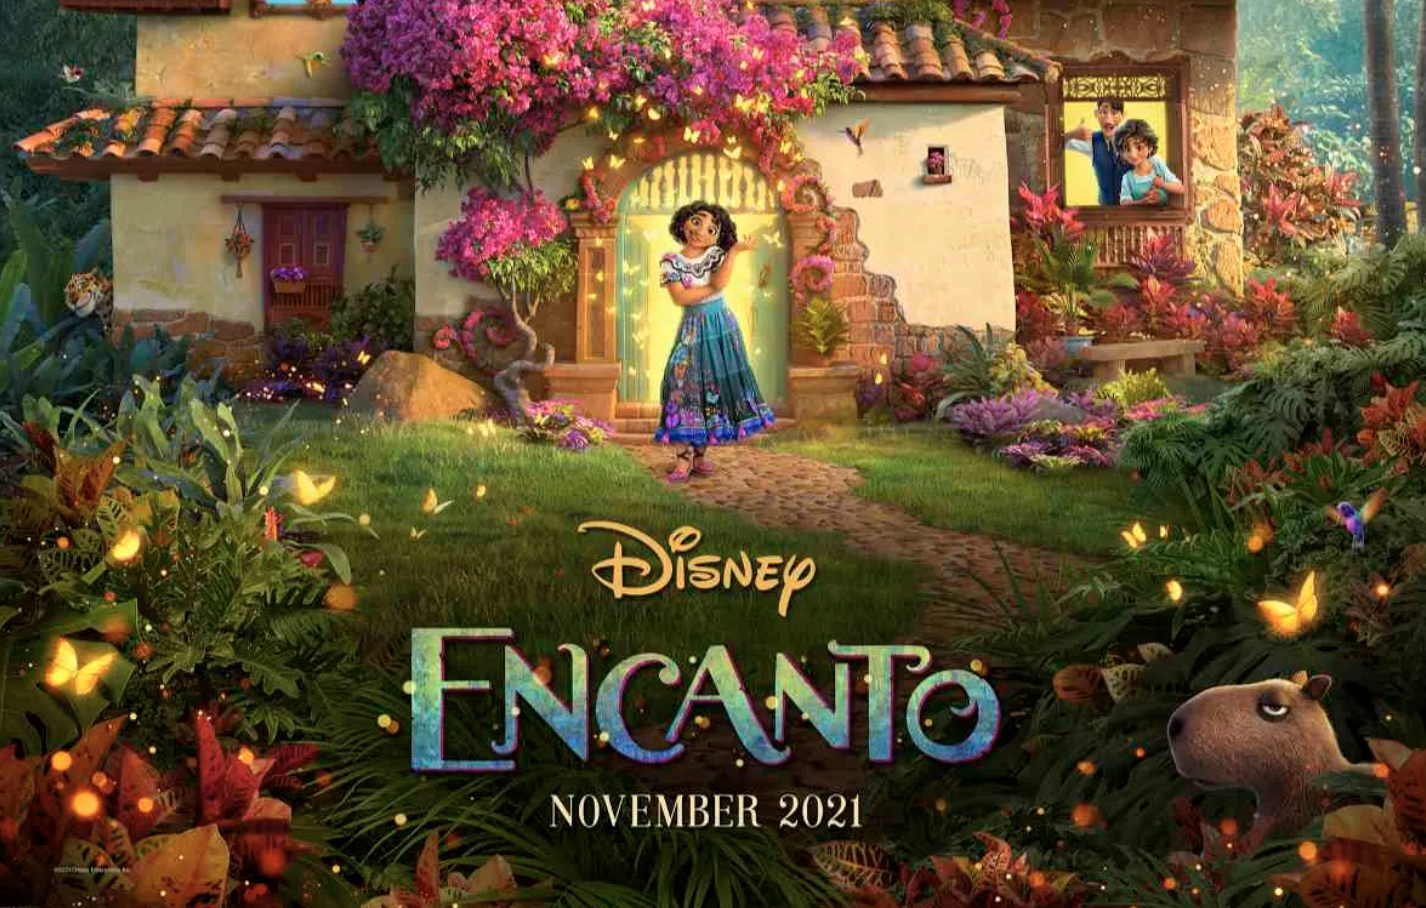 Disney's “Encanto” hits the mark when depicting sibling